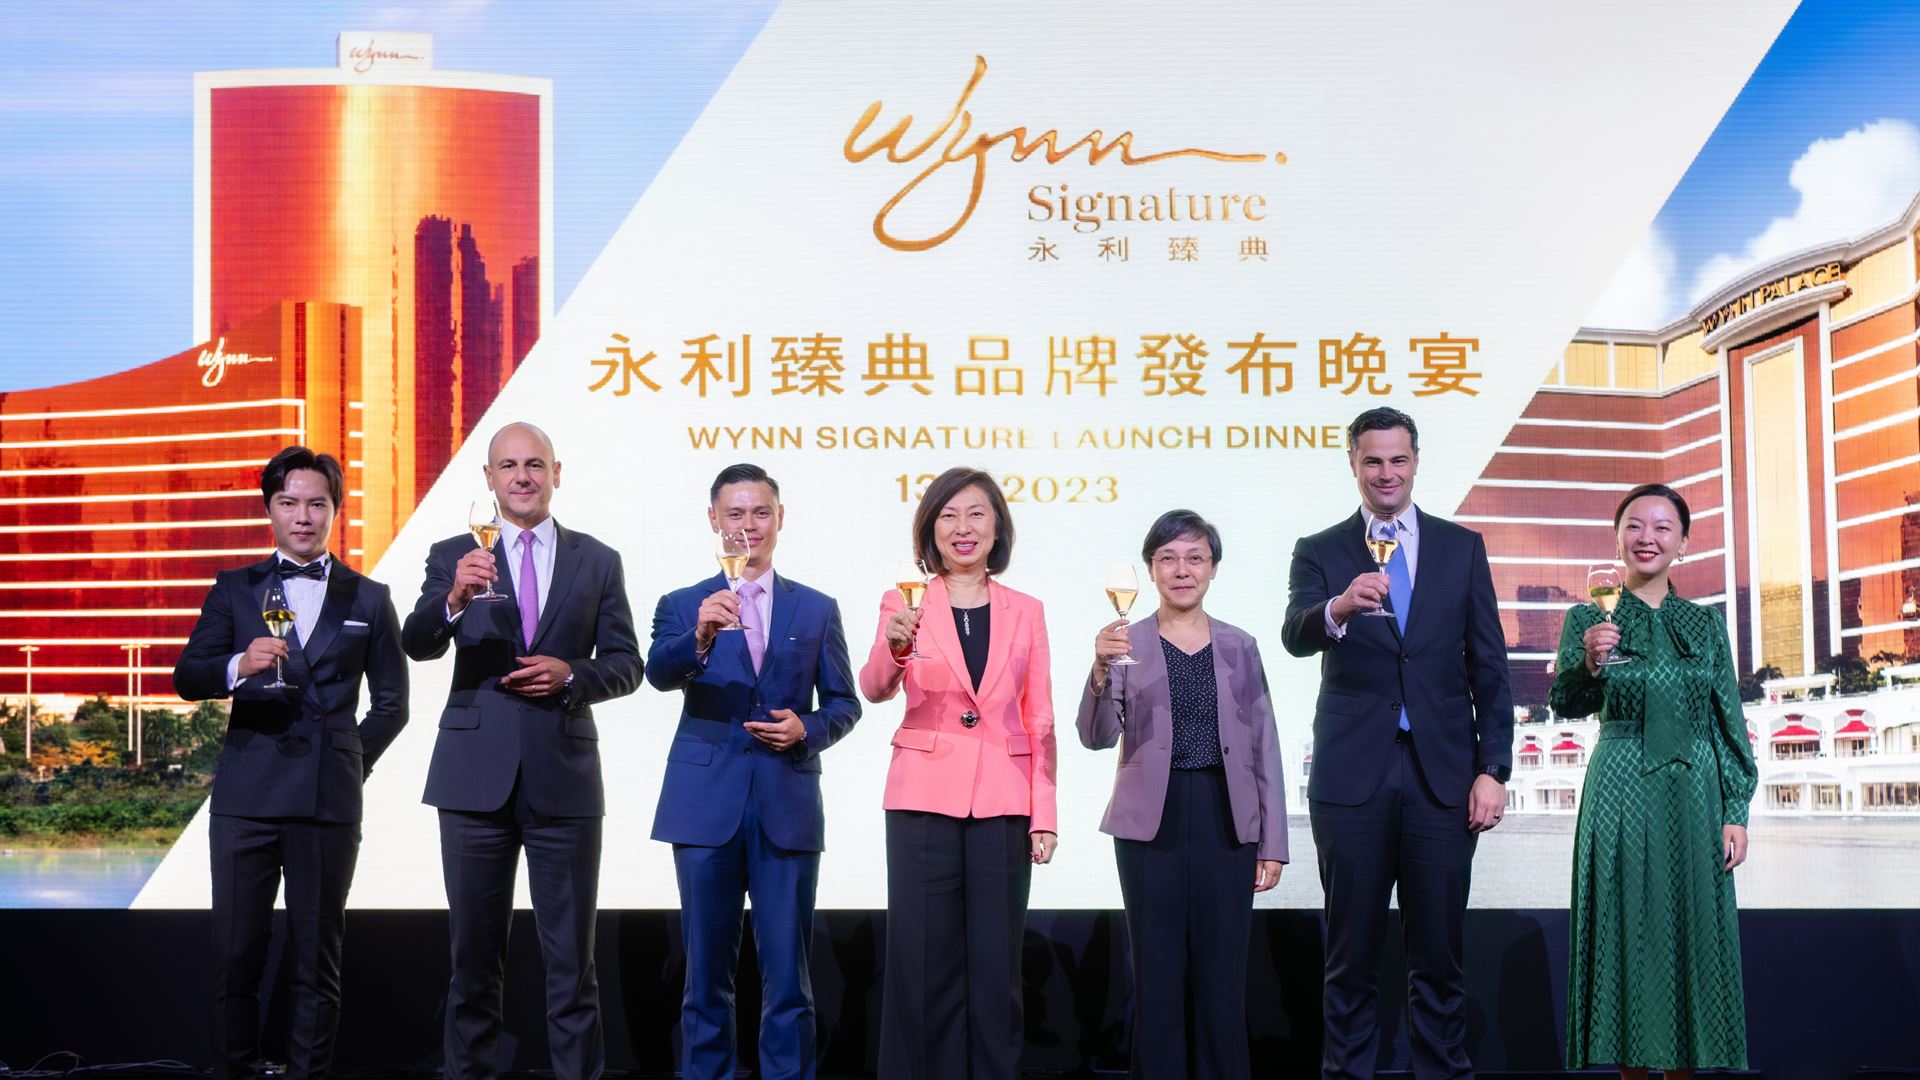 Officiating guests at the "Wynn Signature" launch dinner raise a toast to Wynn's new lifestyle brand